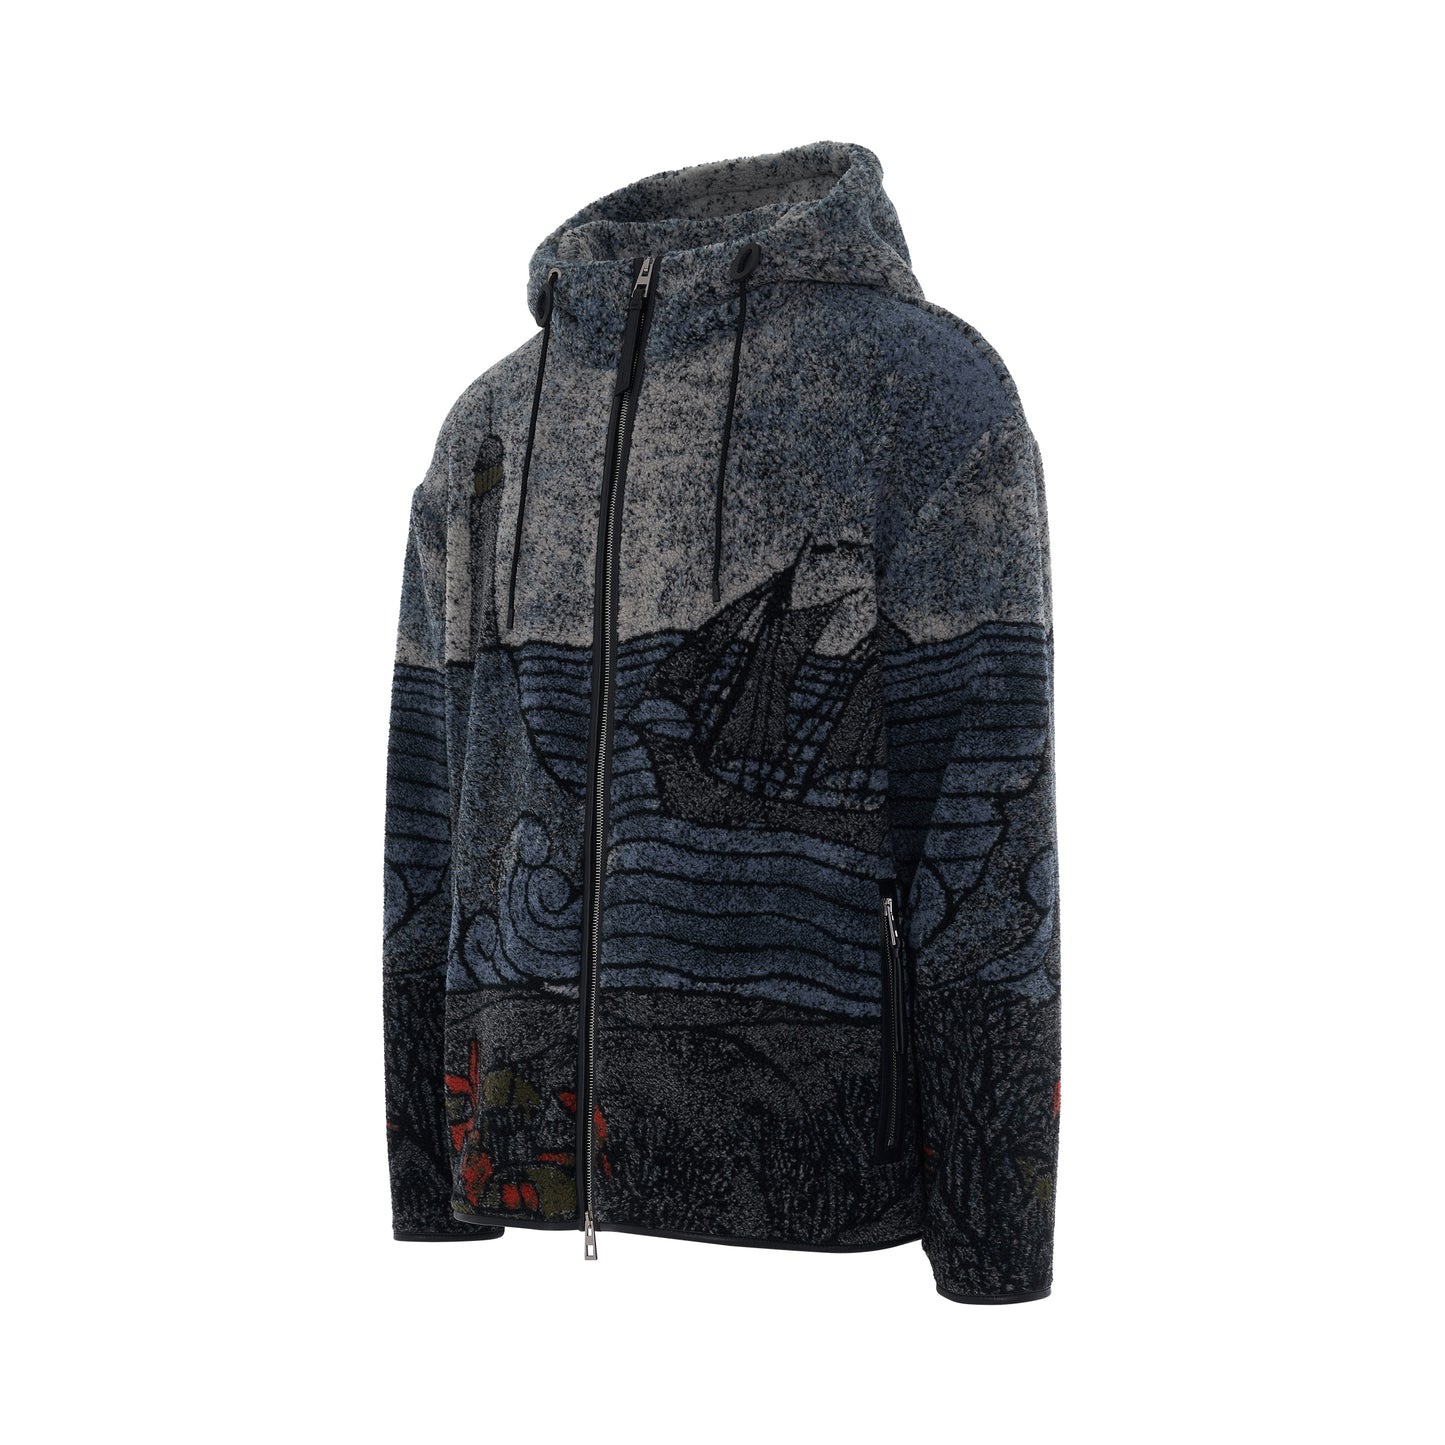 Lighthouse Jacket in Multicolor